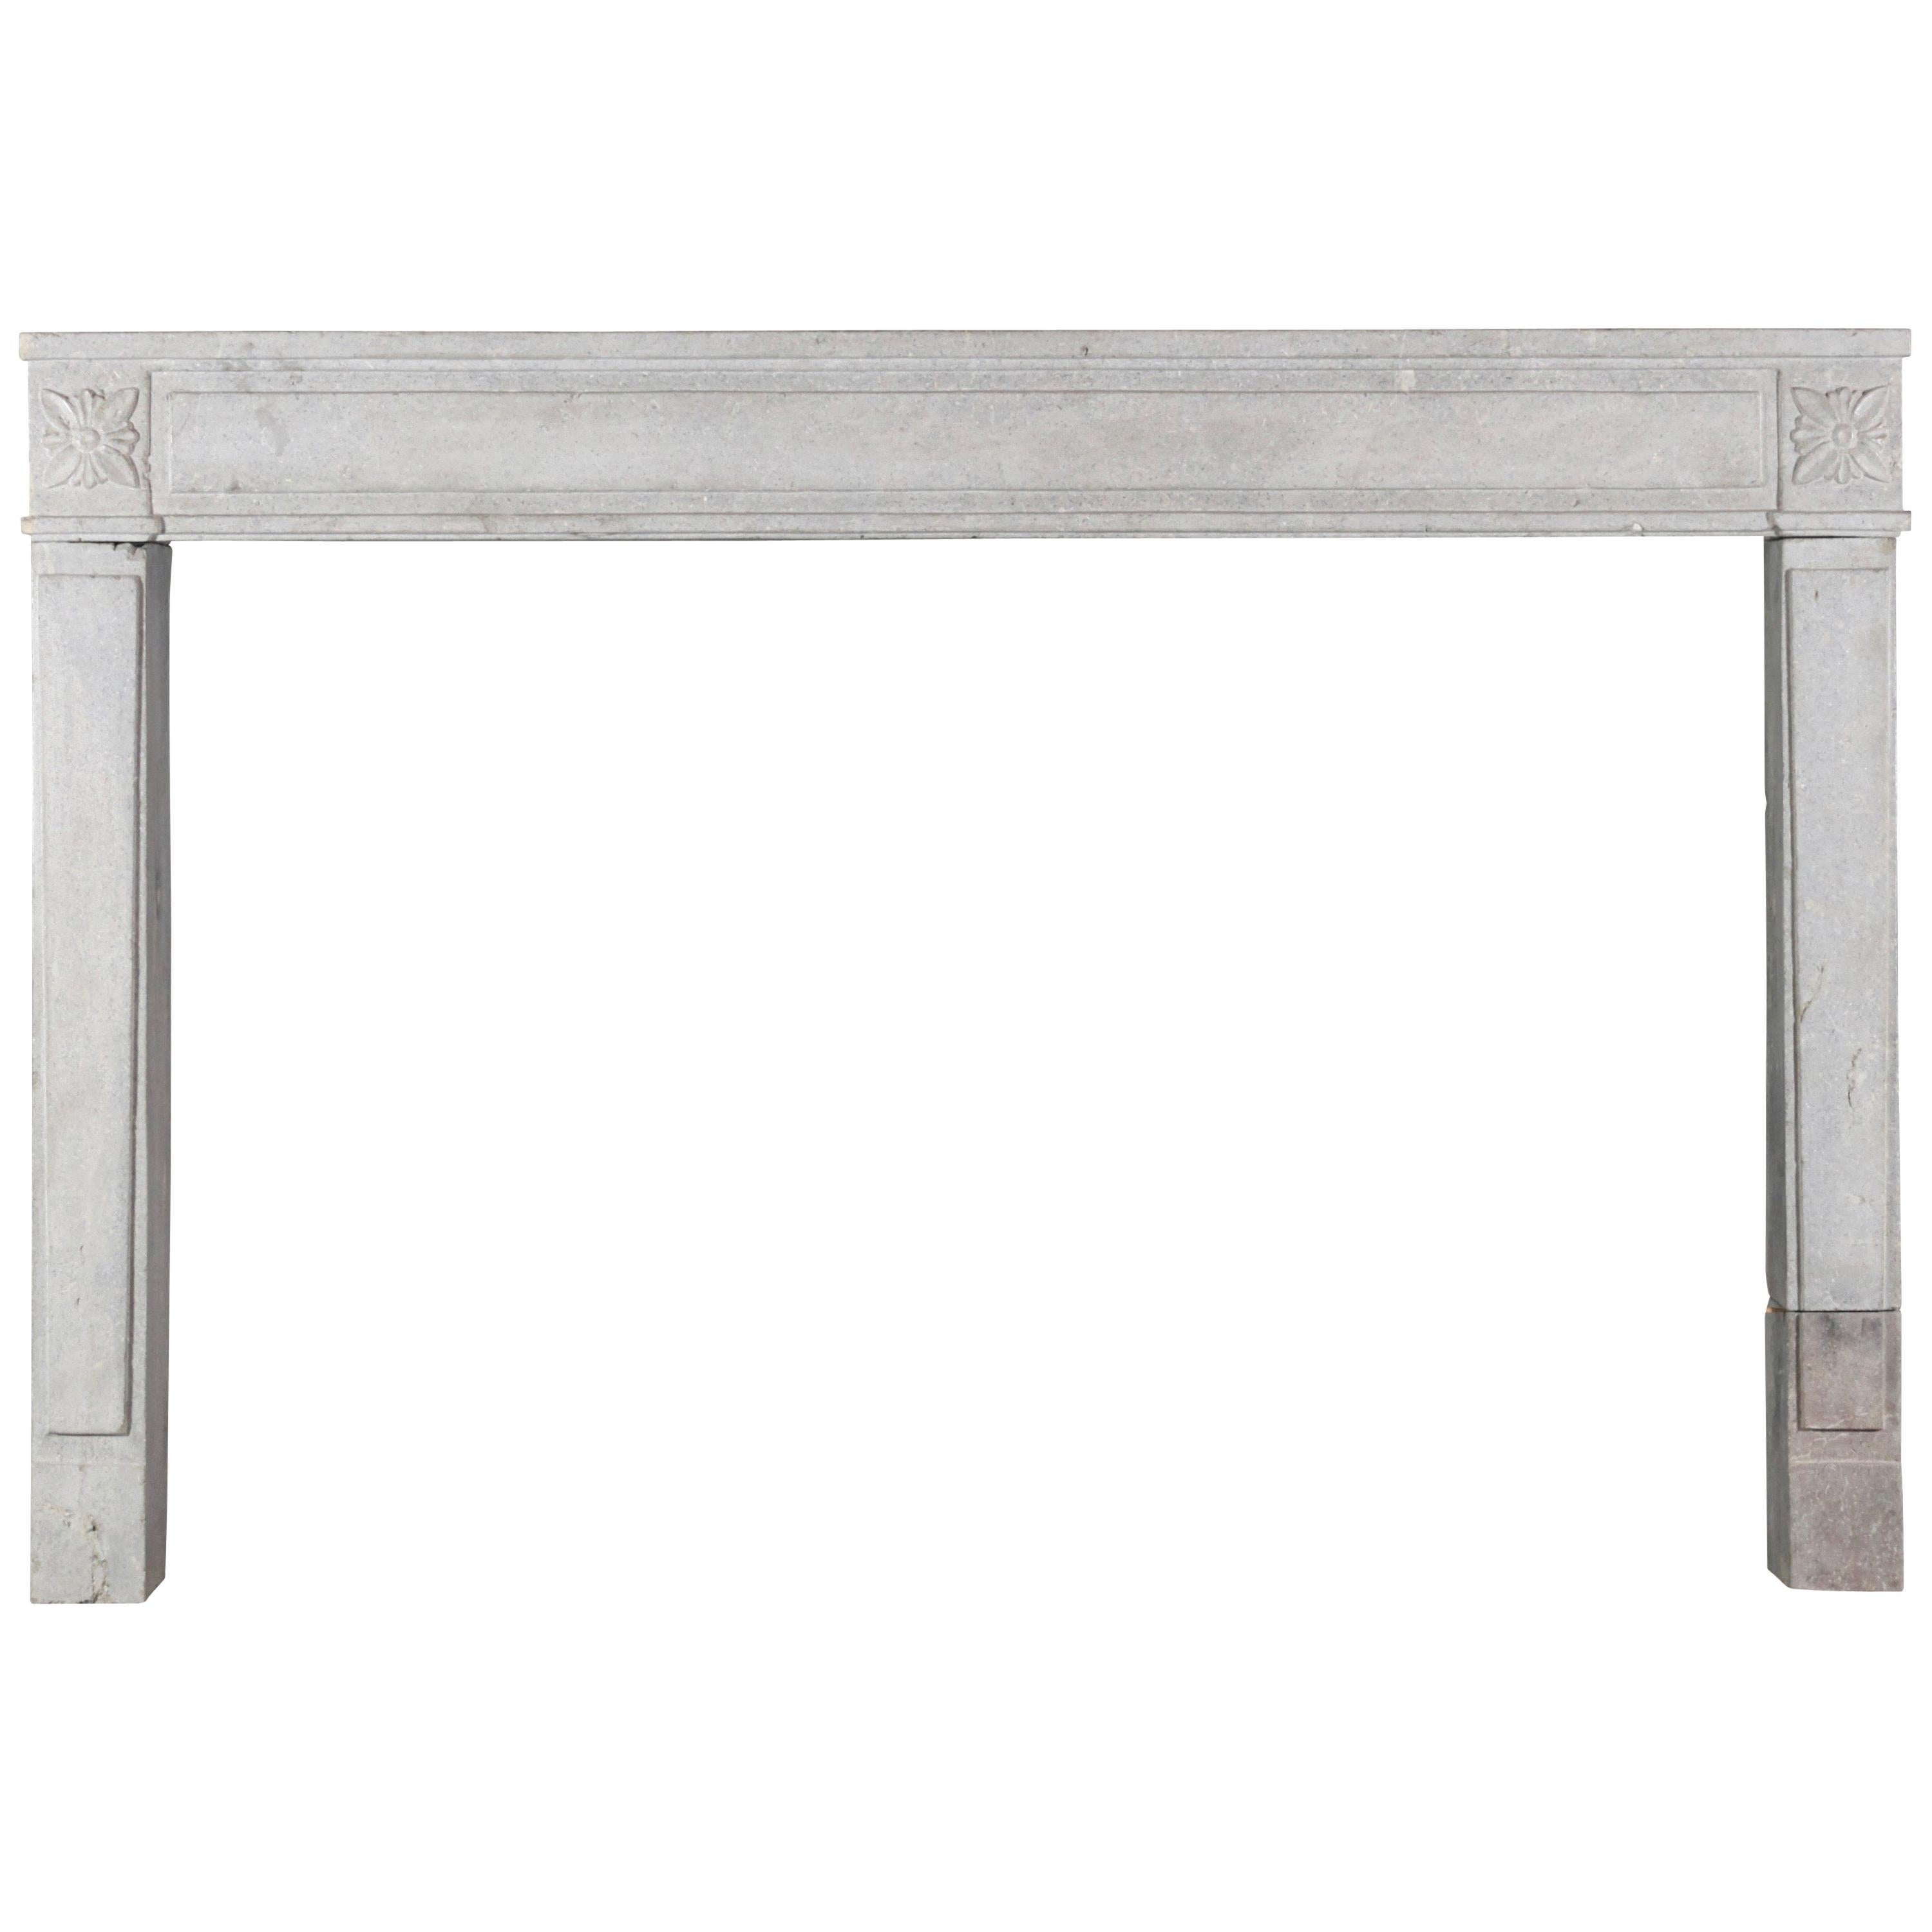 Vintage French Country Style Antique Fireplace Surround For Sale